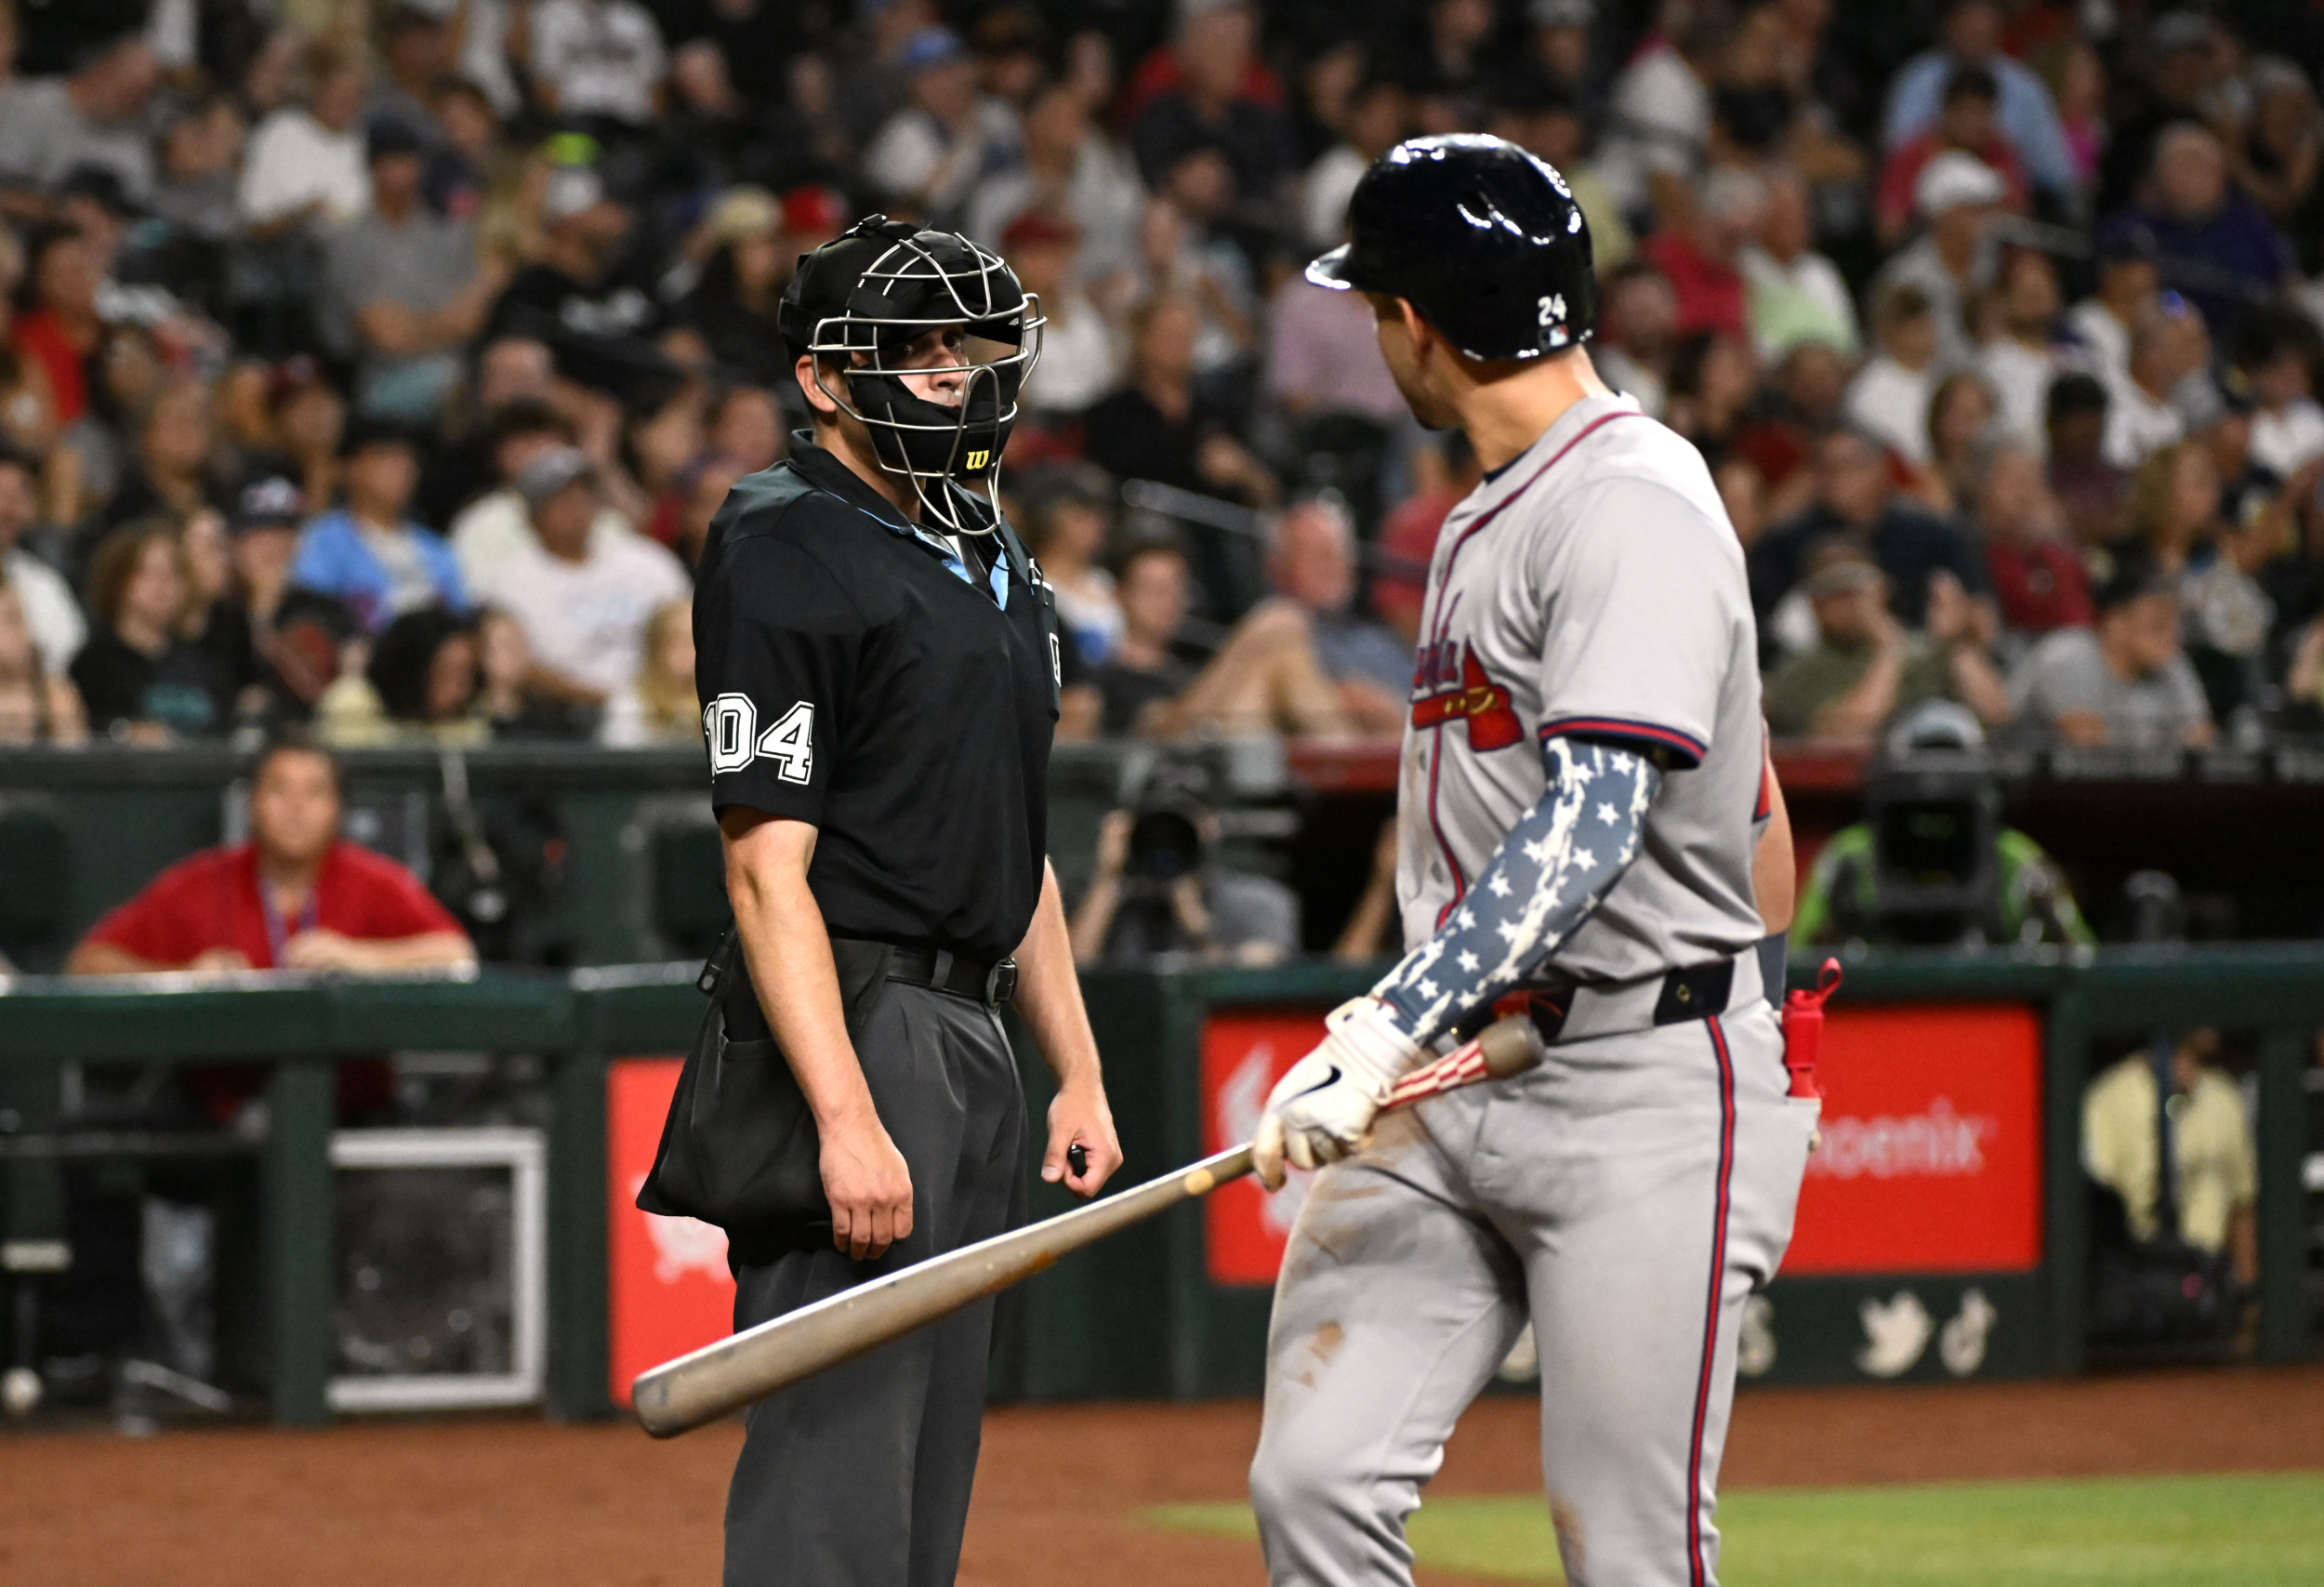 “Robo-referees now?” MLB commissioner hints at debut in spring training 2025